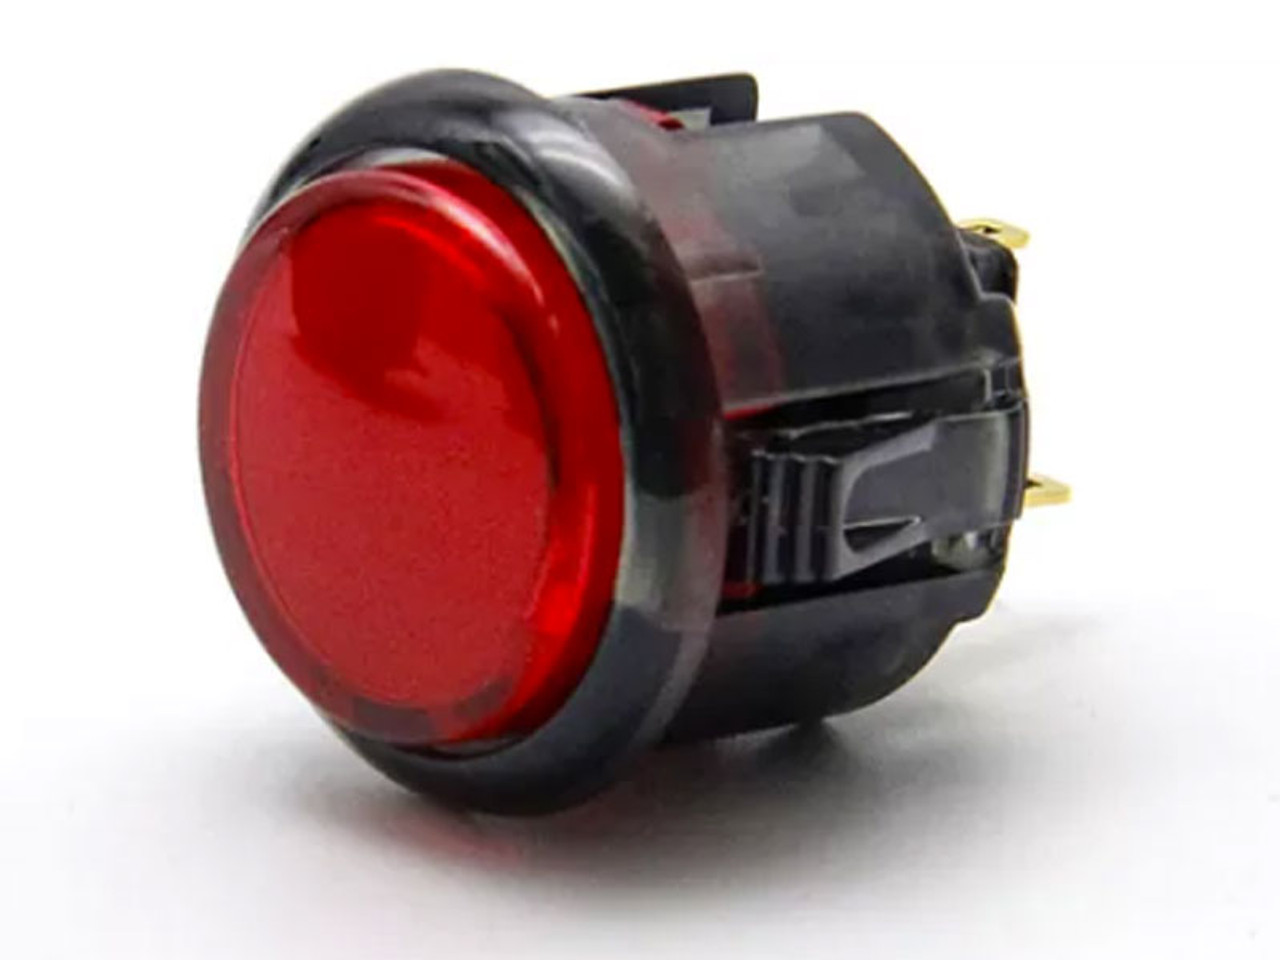 Qanba Gravity 24-KS 24mm Snap-in Clear Mechanical Pushbutton - Clear Red  Black